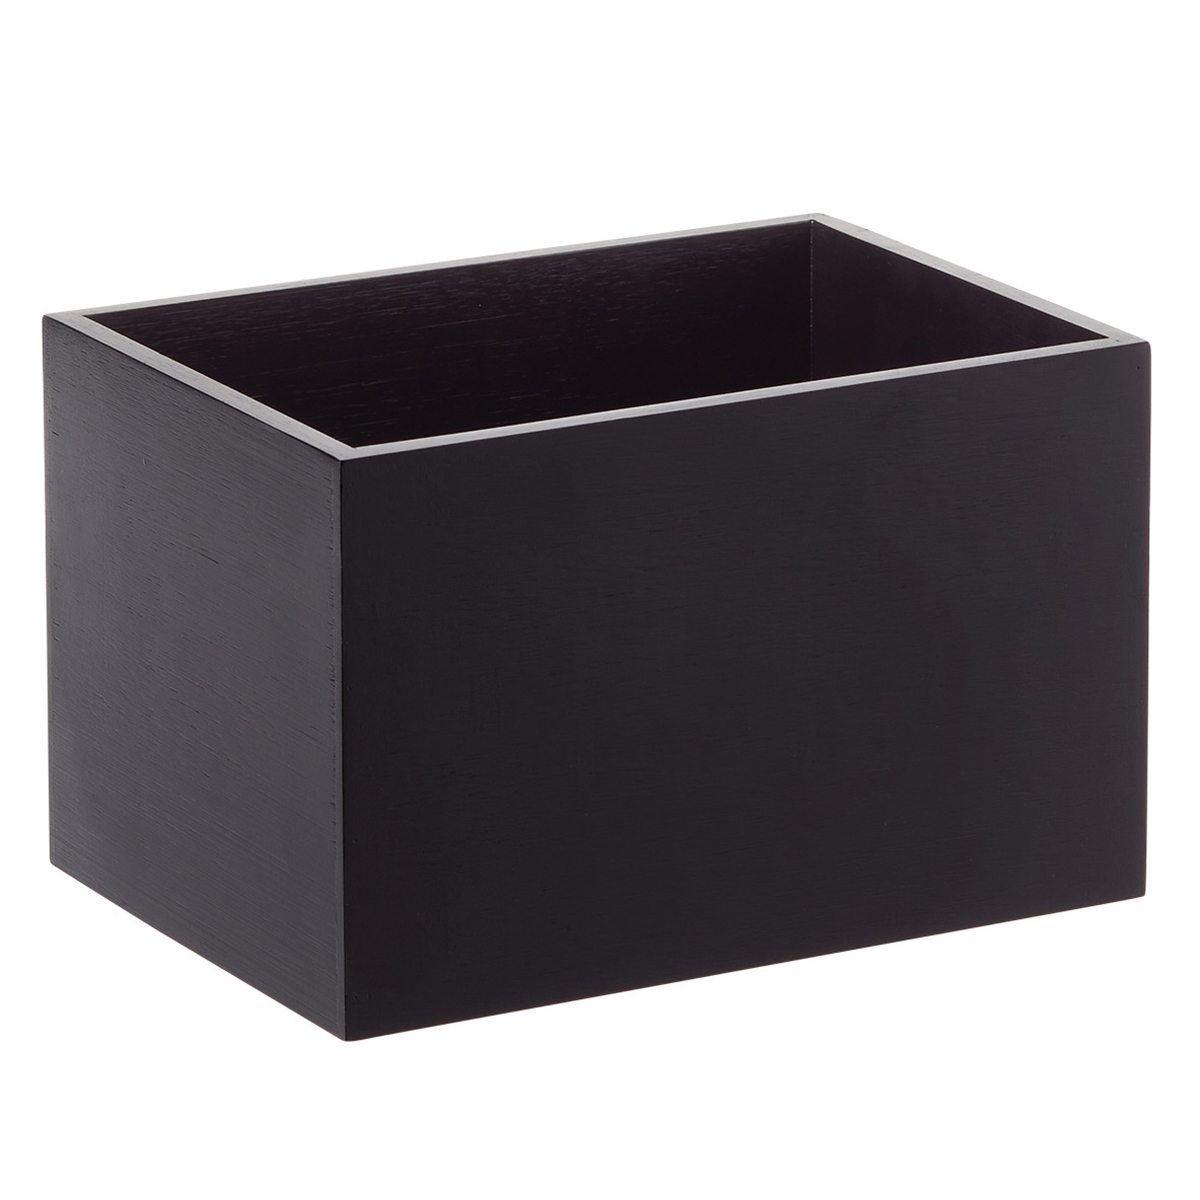 https://www.containerstore.com/catalogimages/476387/10091799-TCS-artisan-bamboo-bin-blac.jpg